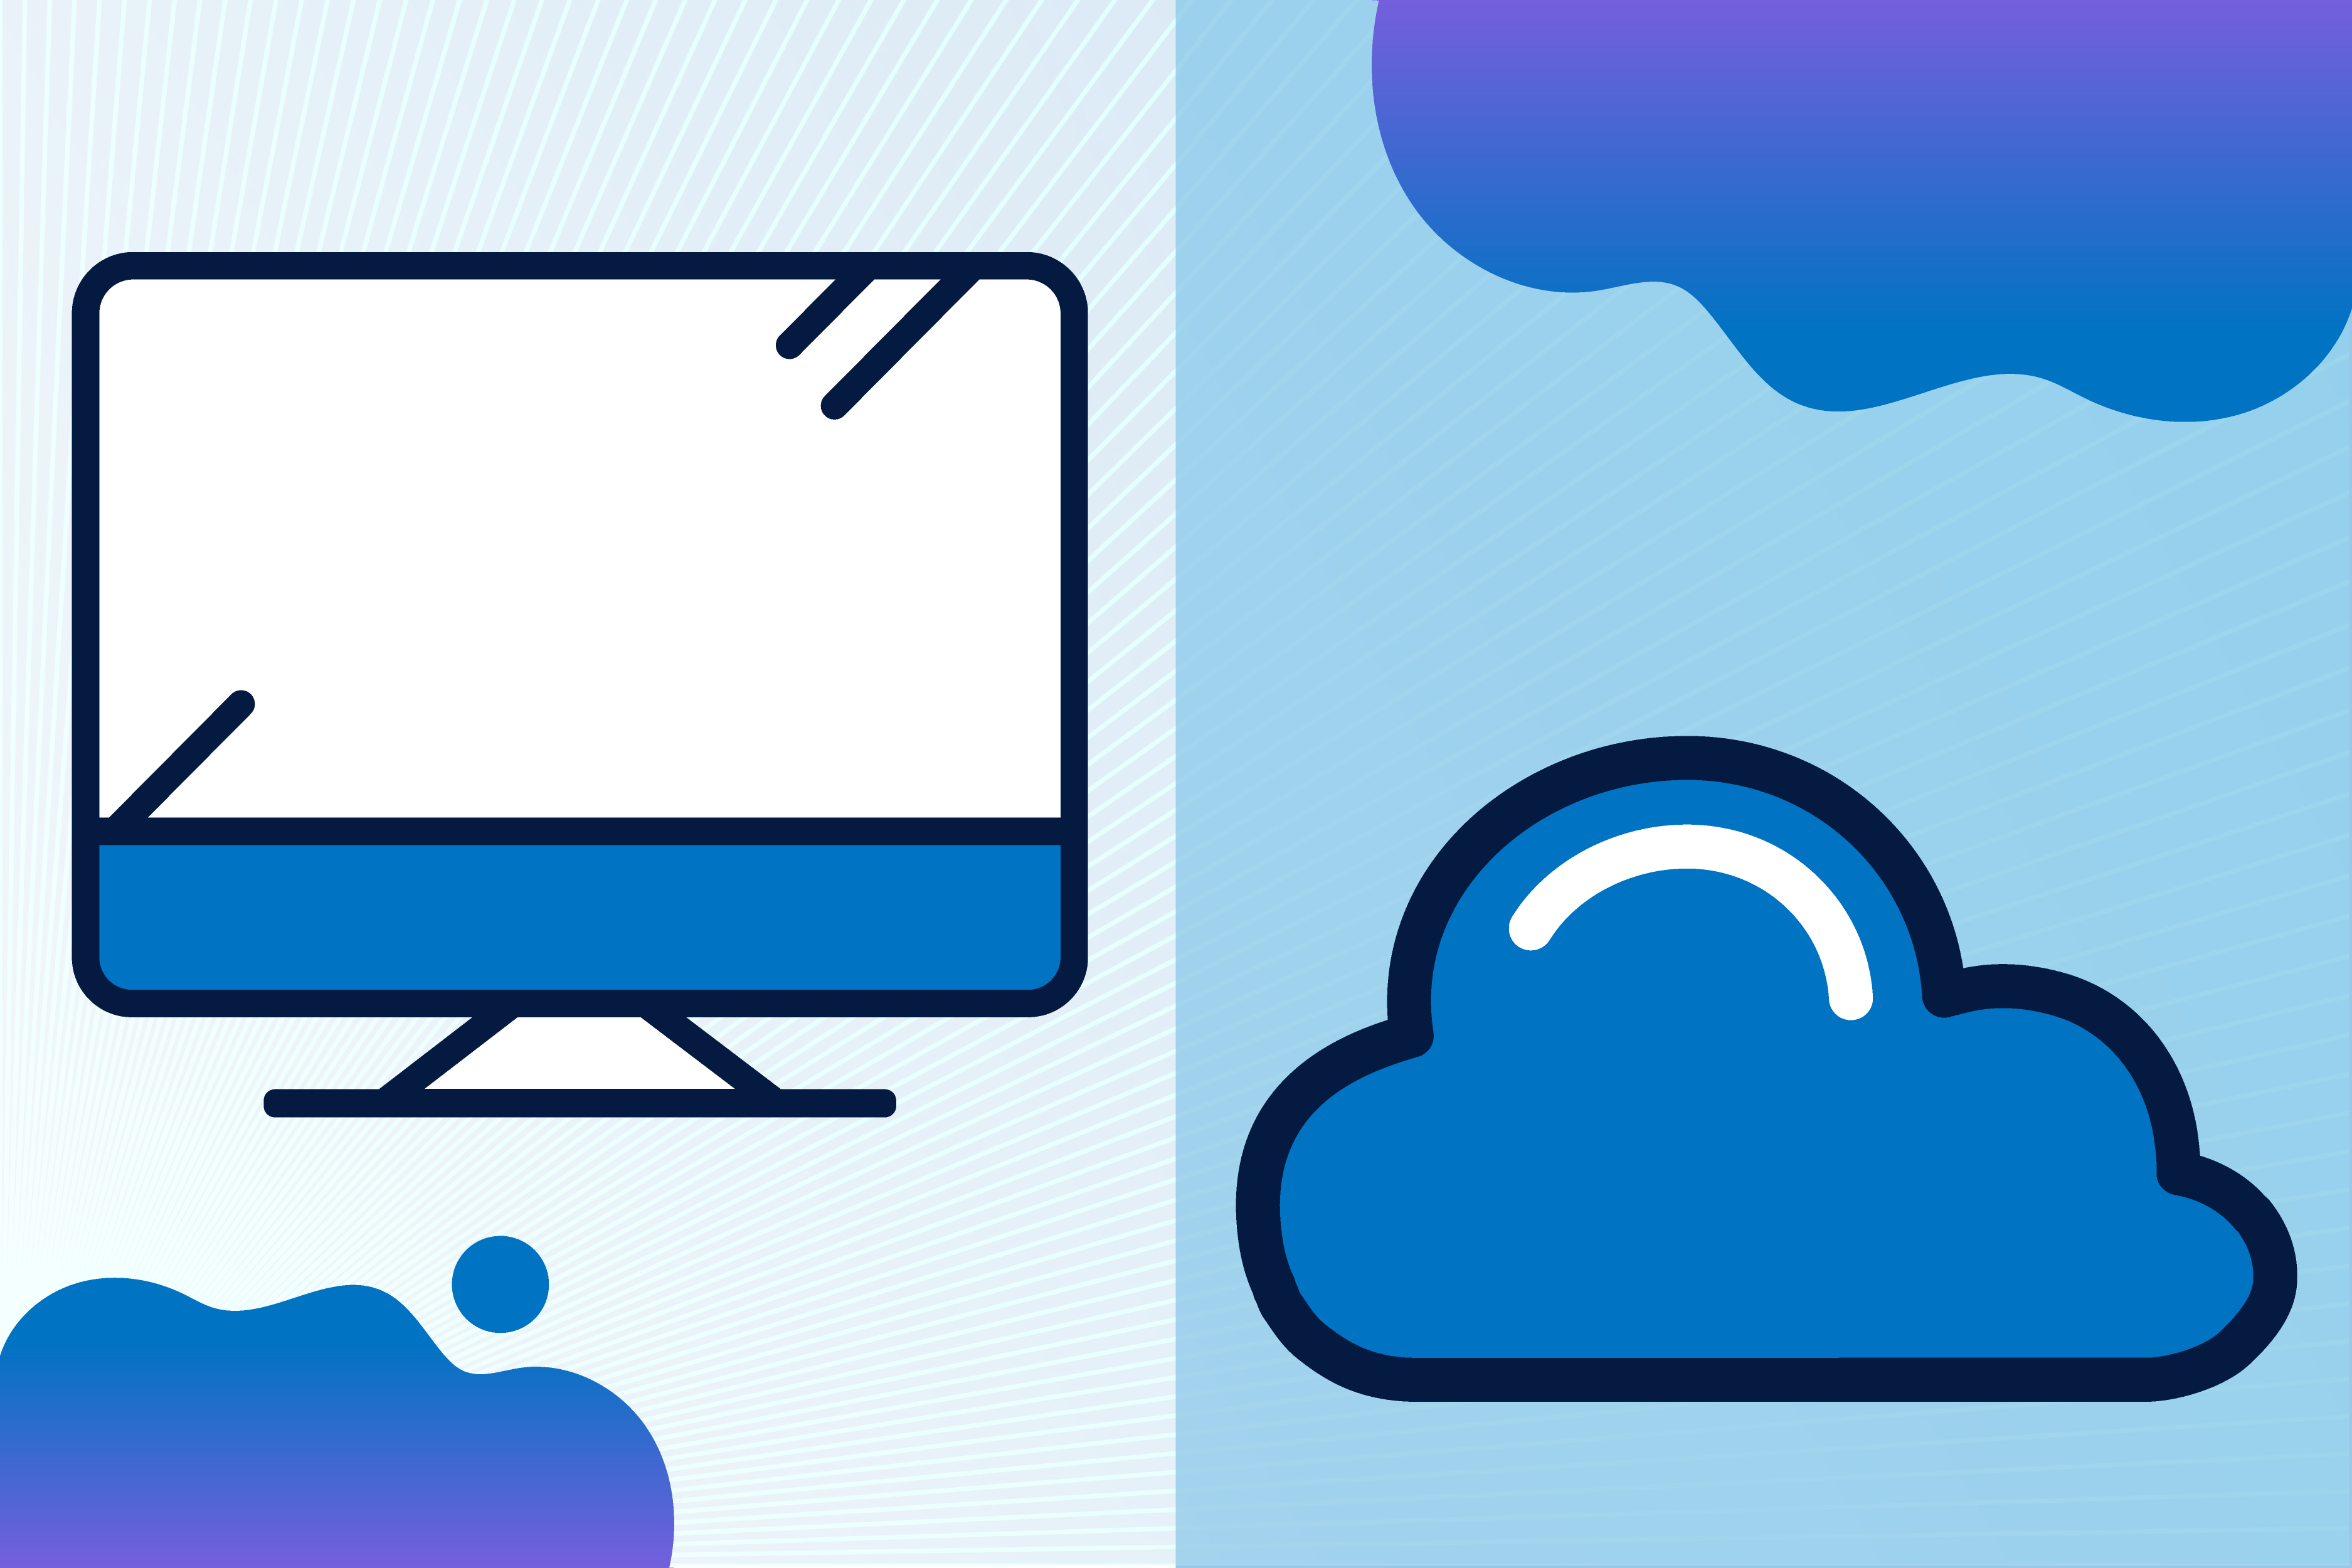 Vector illustration of a desktop computer in contrast to the cloud services